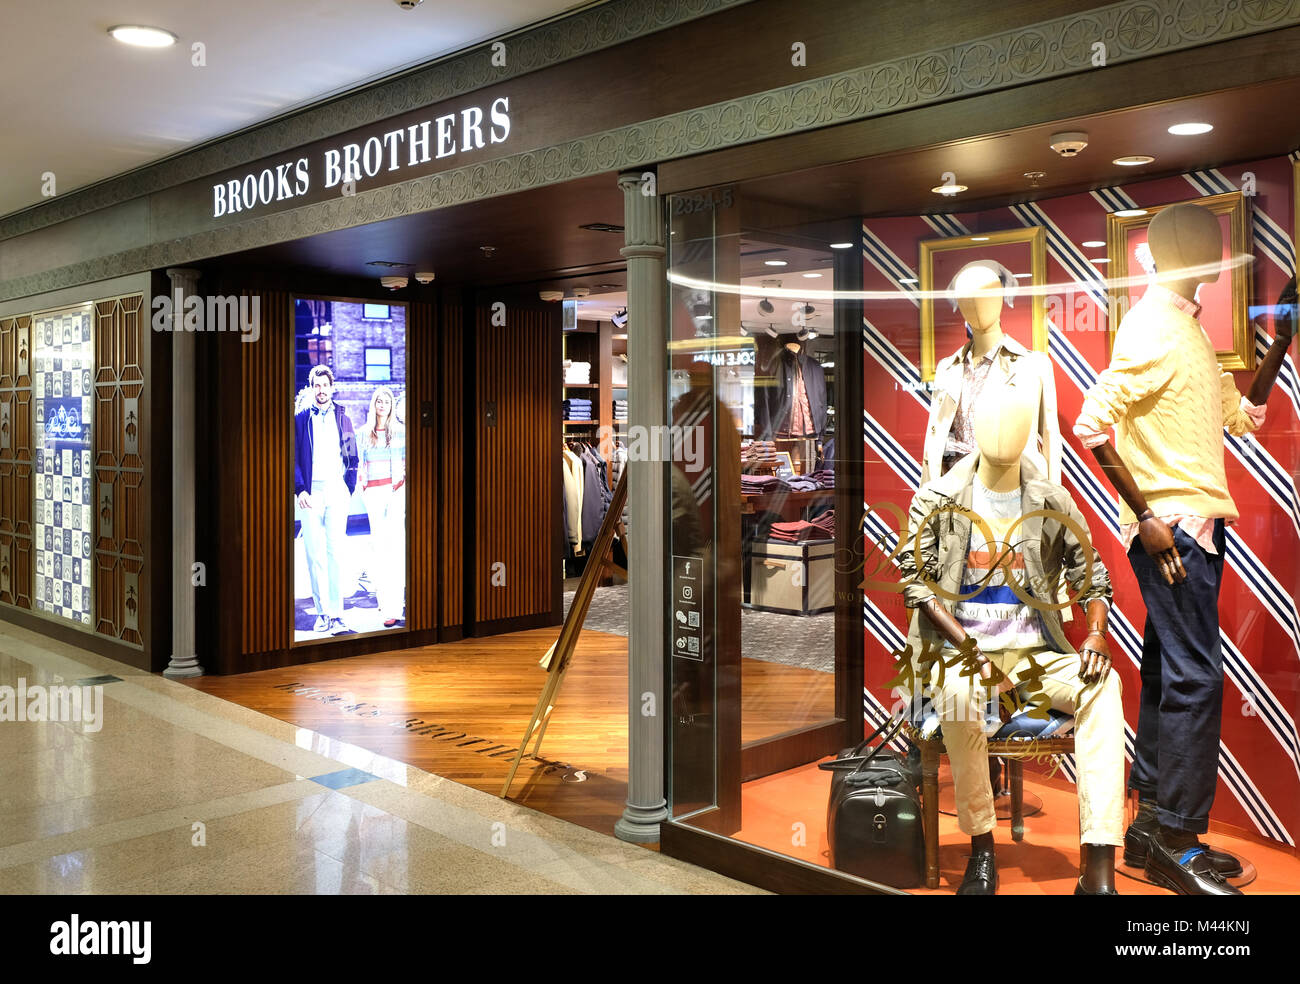 brooks brothers outlet mall